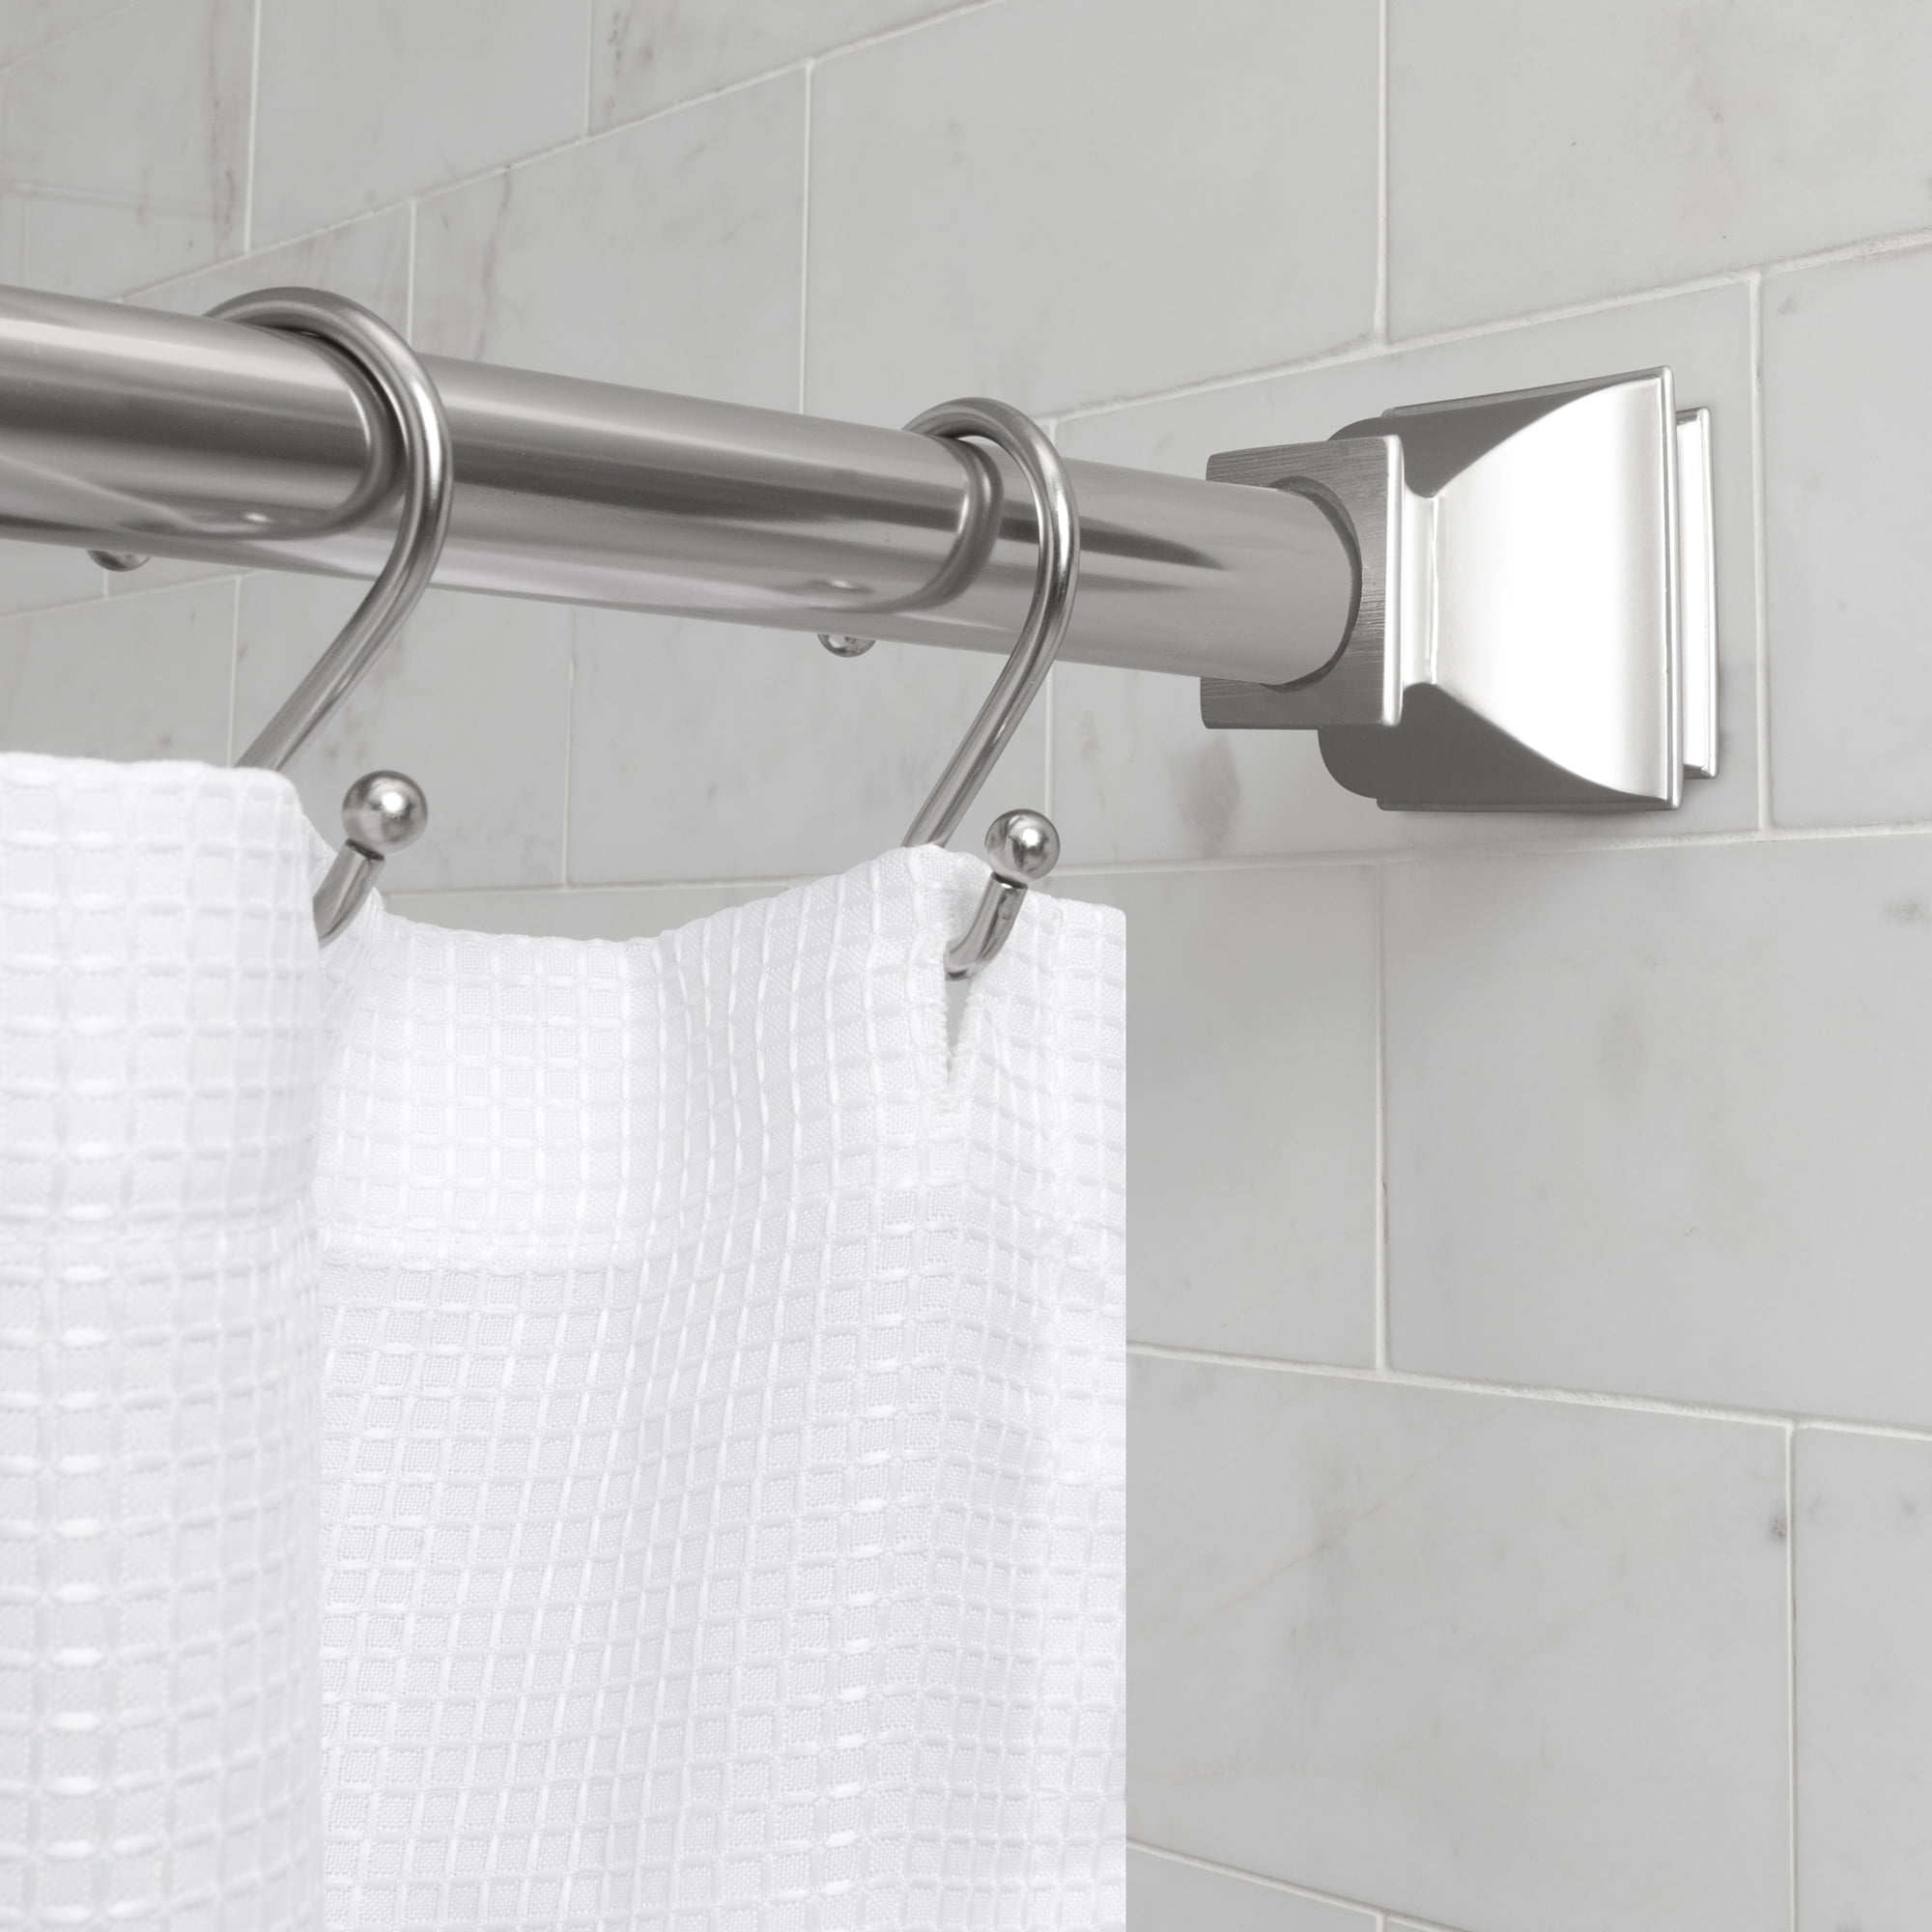 Aluminum Square Shower Tension Rod, How To Hang An Adjustable Shower Curtain Rod